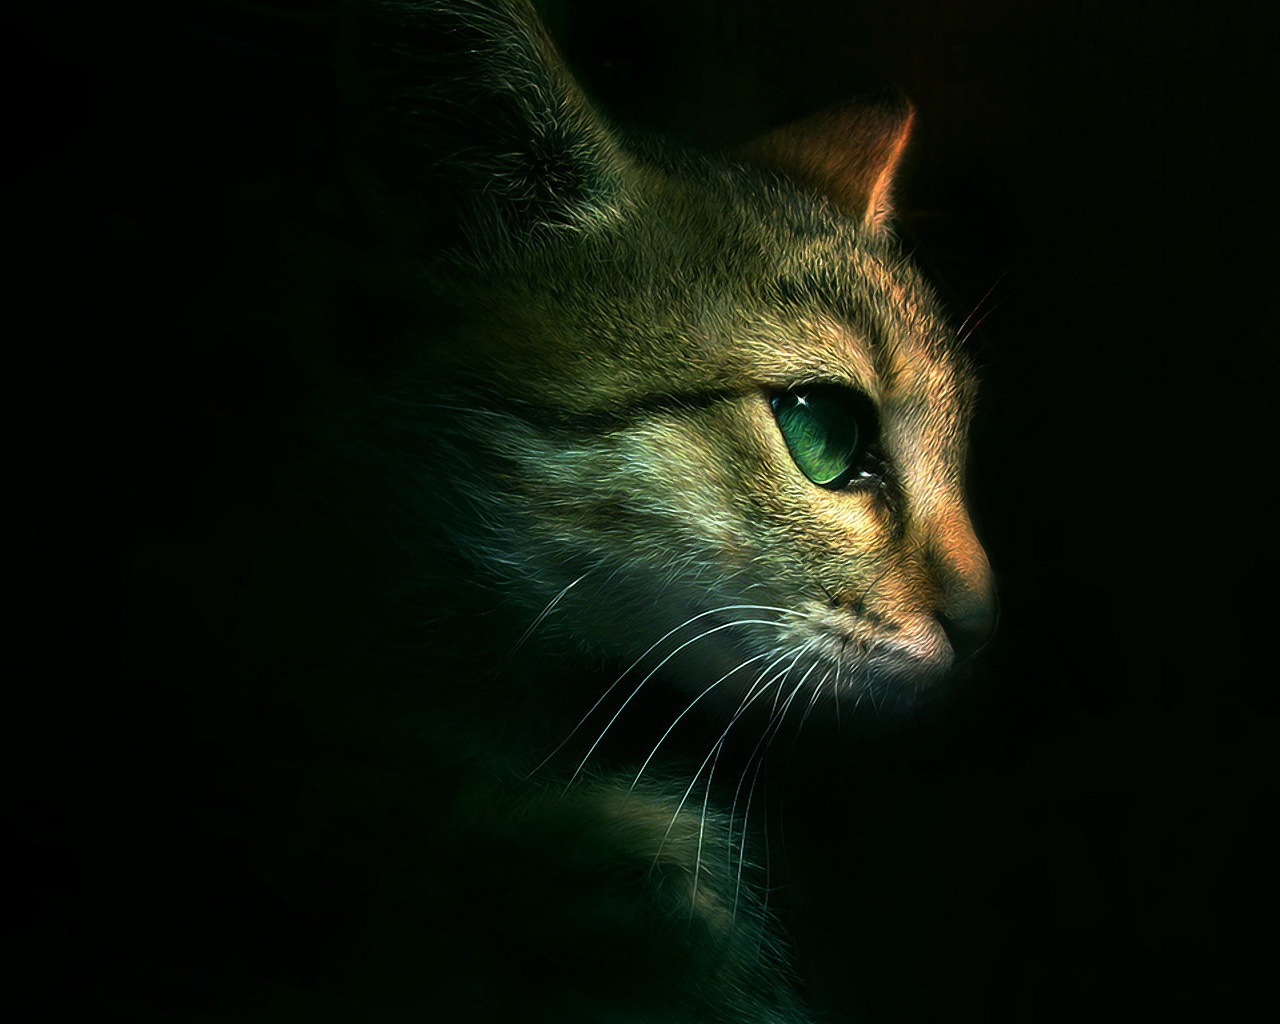 The head of a cat on a black background